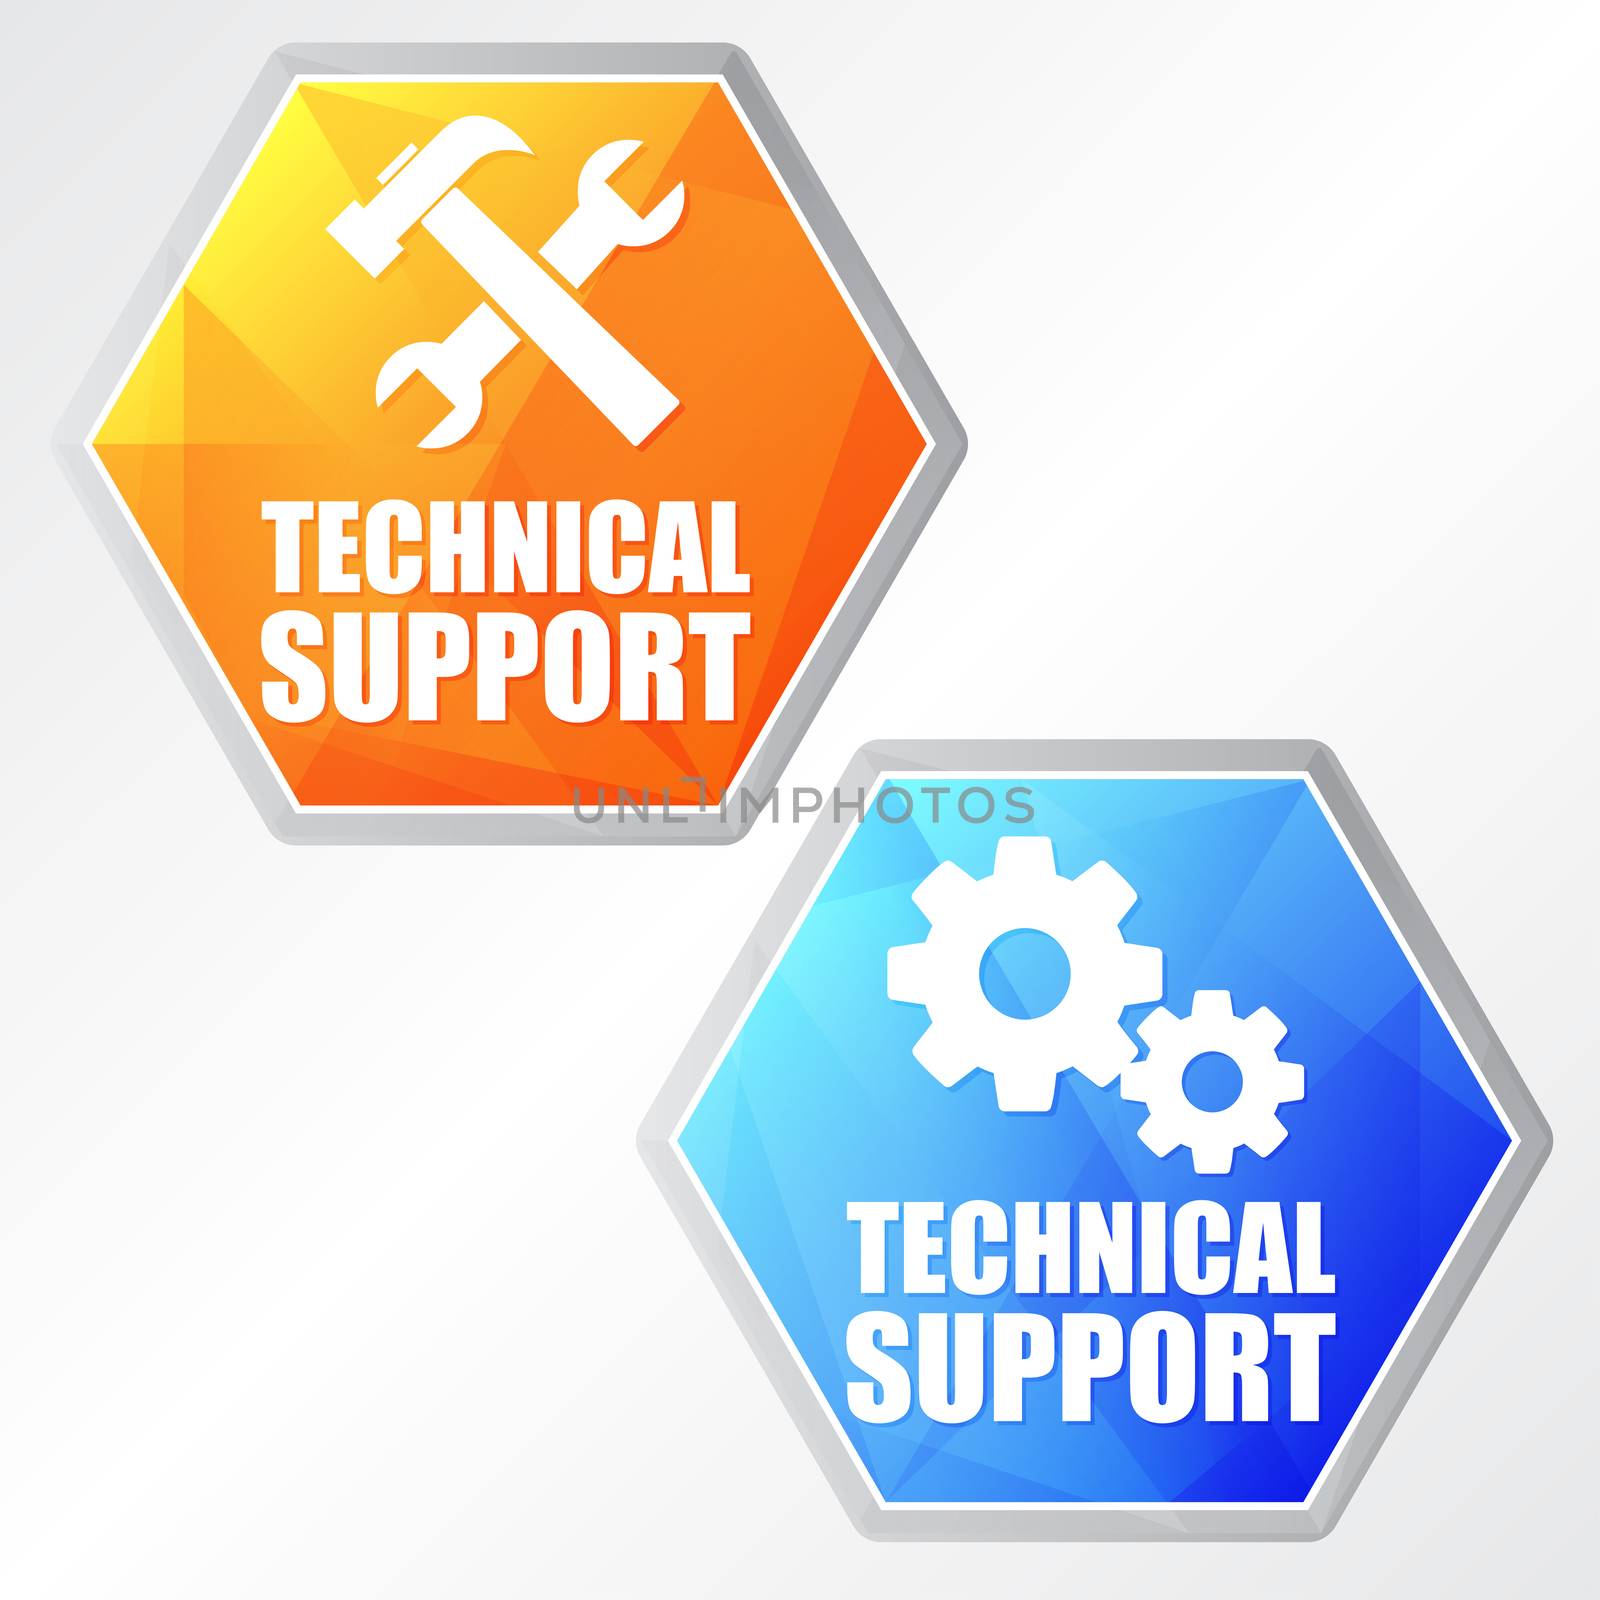 technical support with tools sign and gear wheels - two colors hexagons web icons with symbols, flat design, business service concept